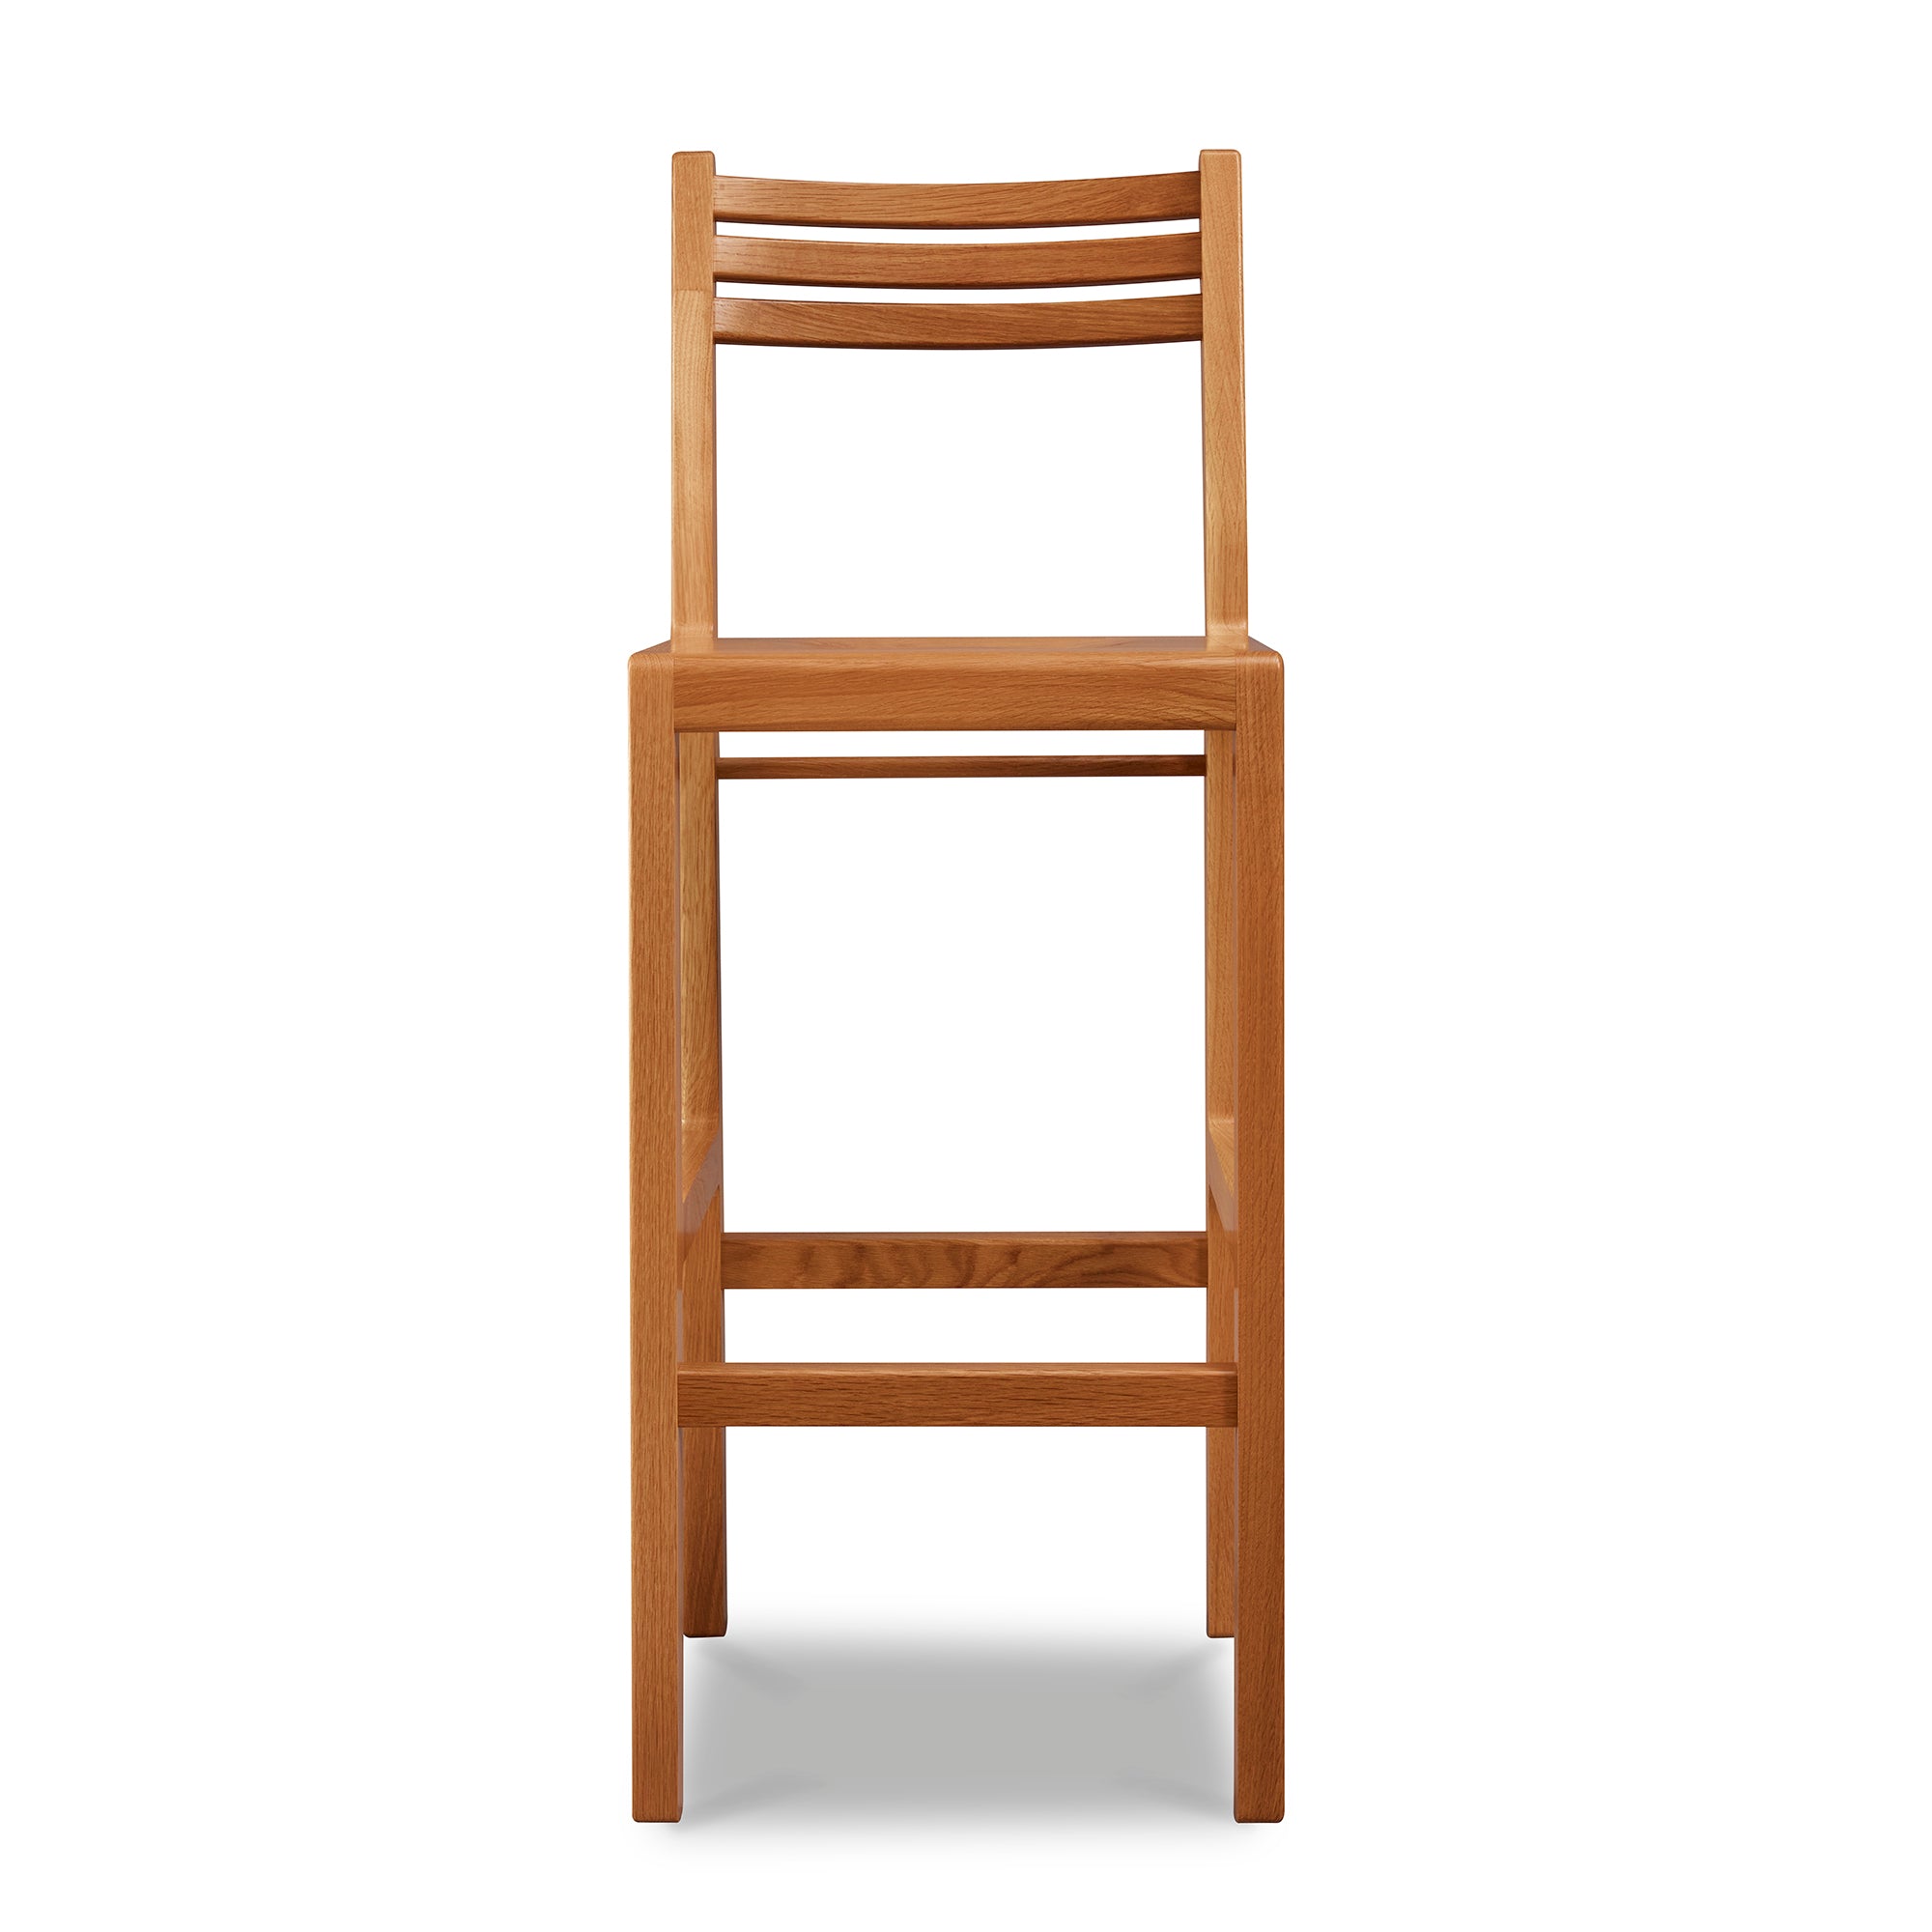 Solid white oak wood bar stool with ladderback top